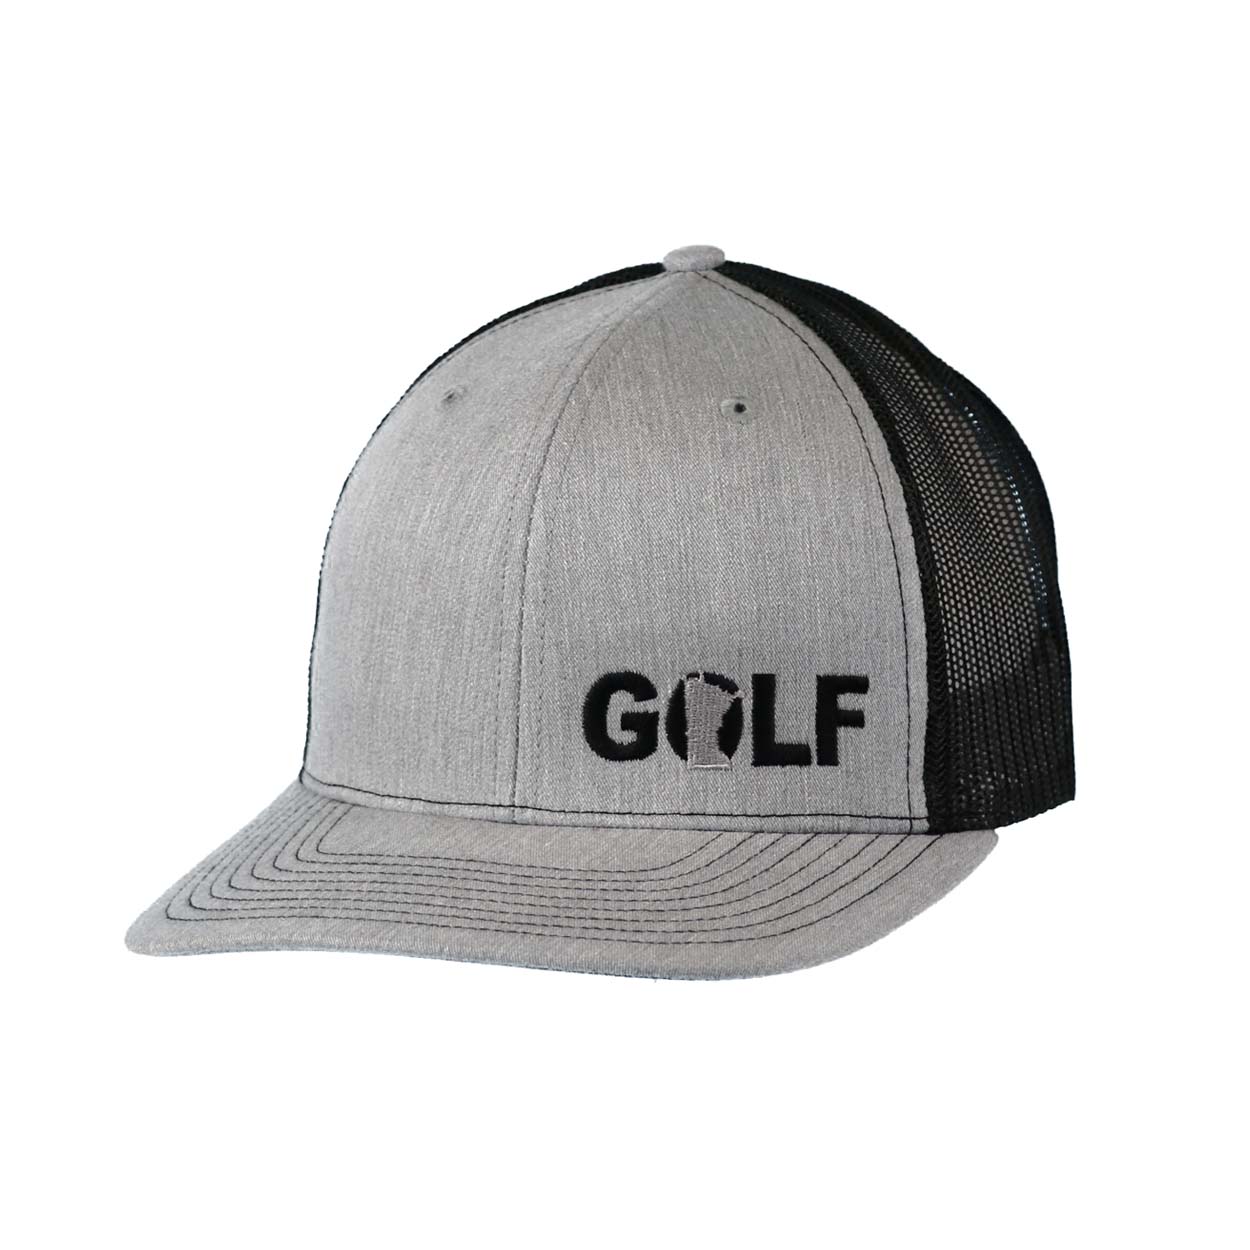 Golf Minnesota Night Out Embroidered Snapback Trucker Hat Heather Gray/Black